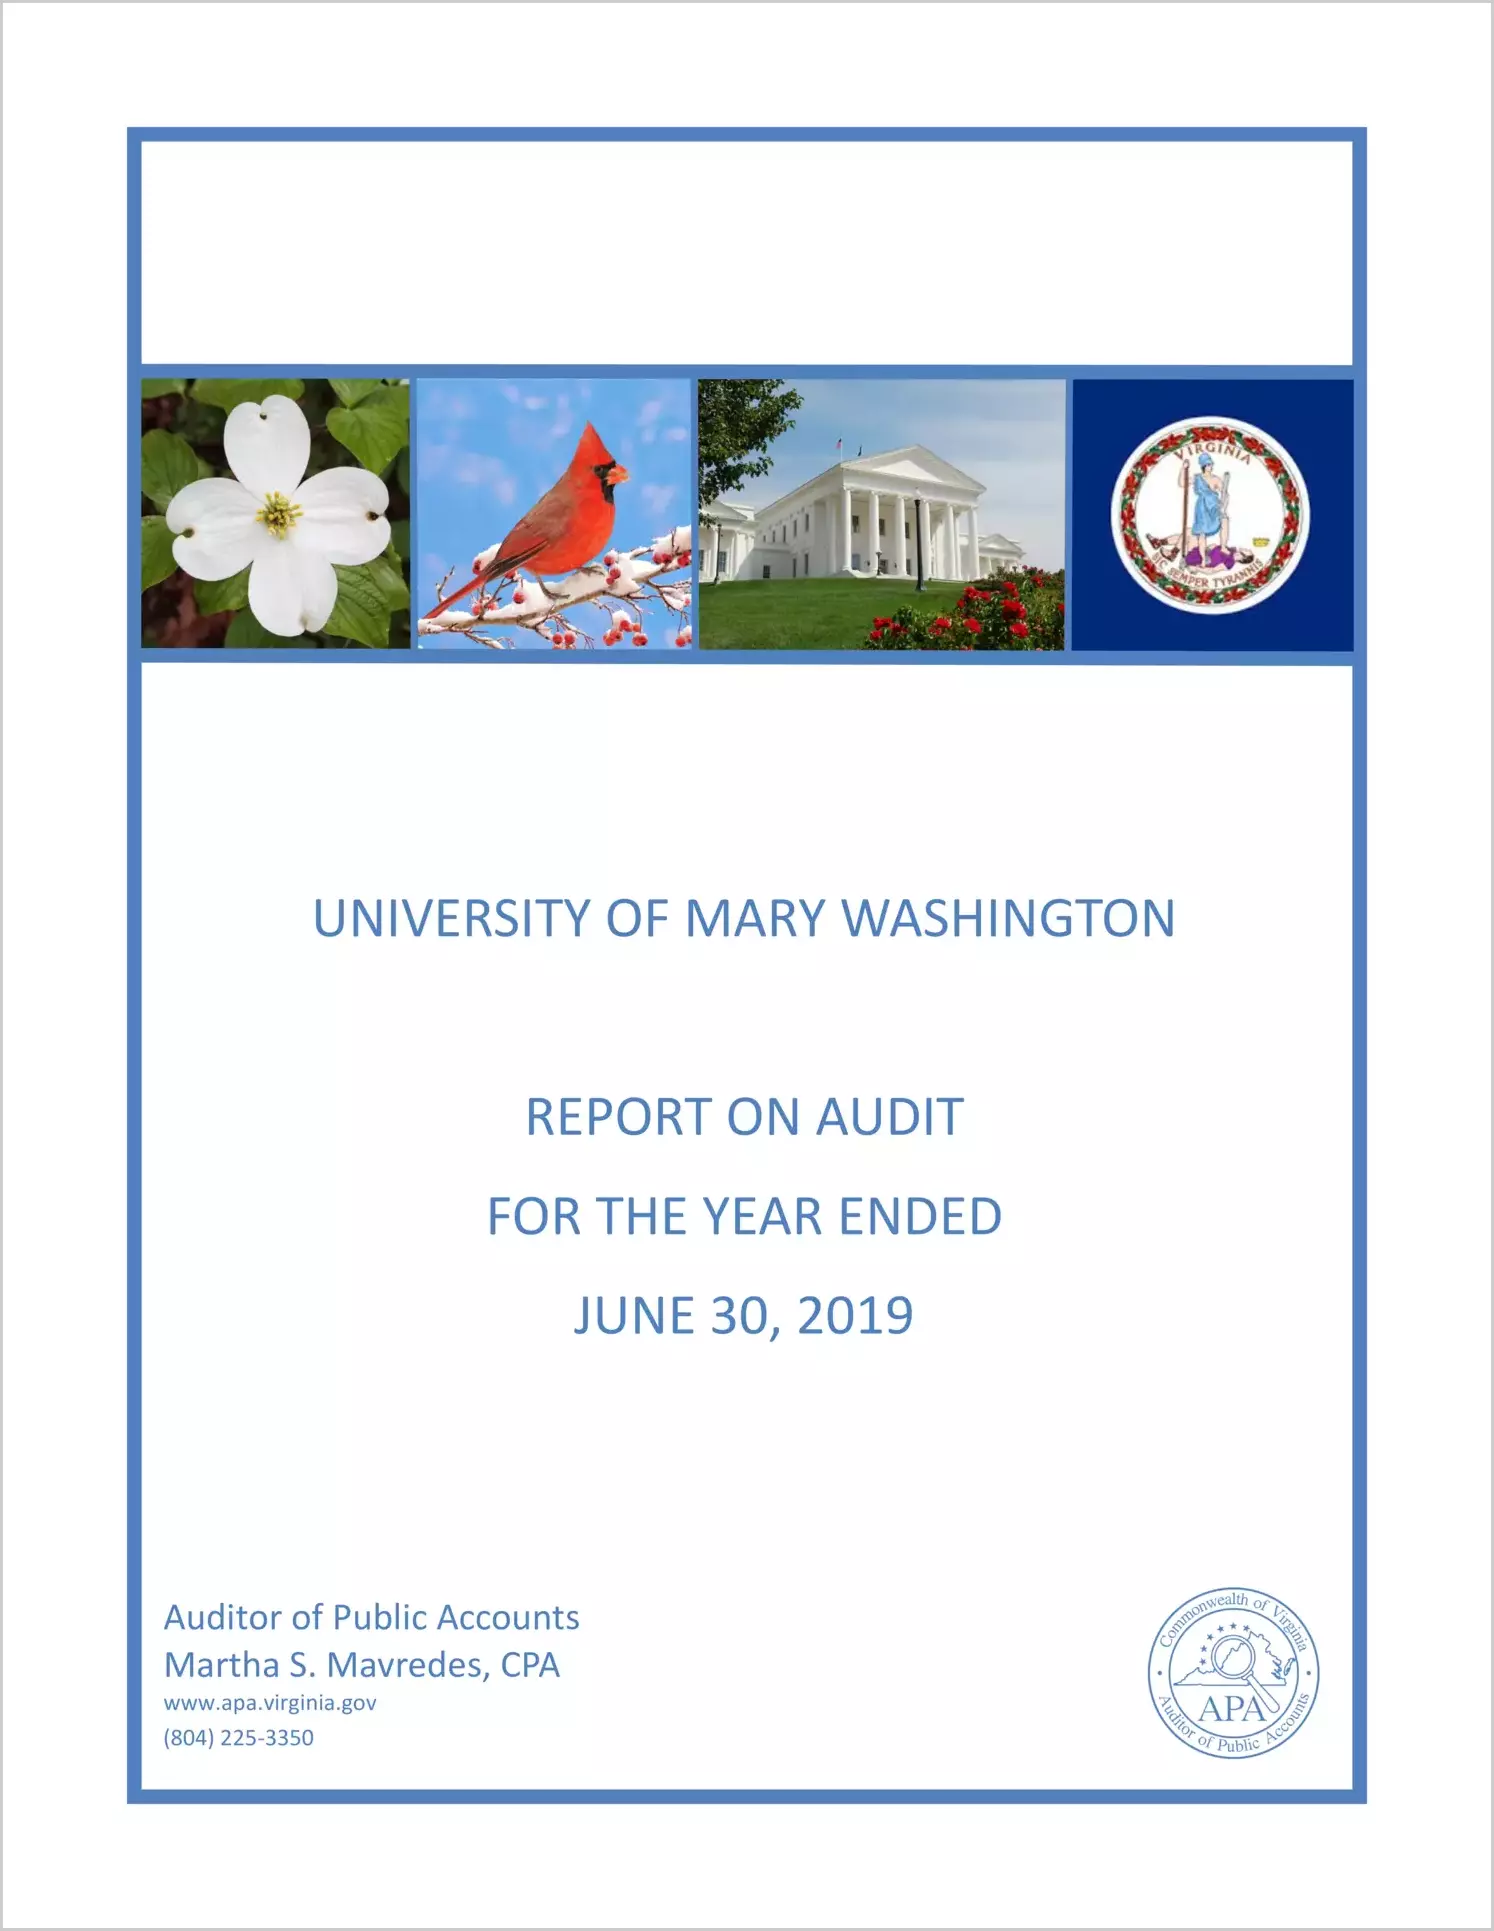 University of Mary Washington for the year ended June 30, 2019